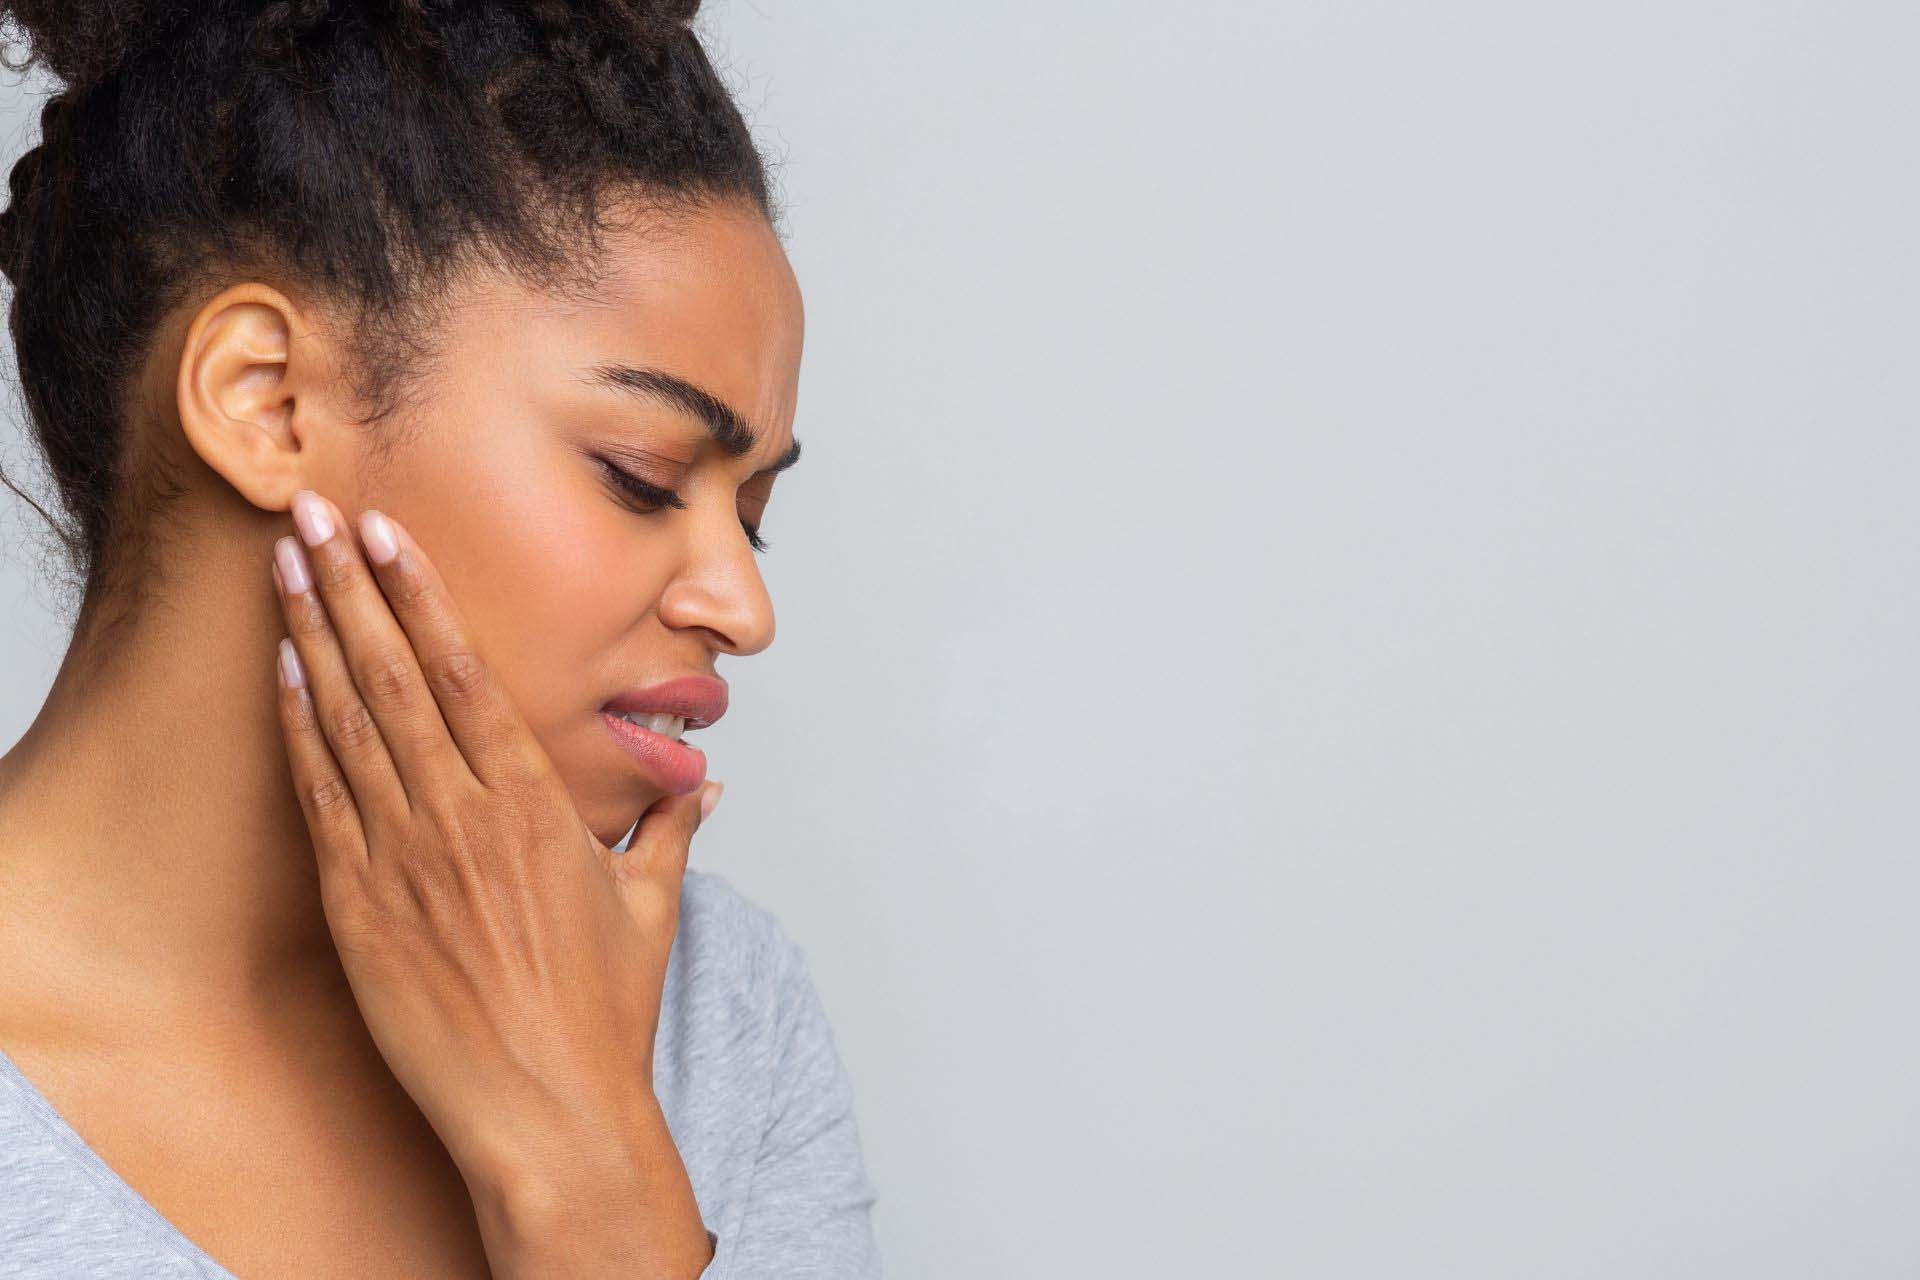 Woman holding jaw due to joint pain by her ears as she sees a TMJ specialist, Dr. Hakim near Silver Lake, Los Angeles, who is treating TMJ for her.